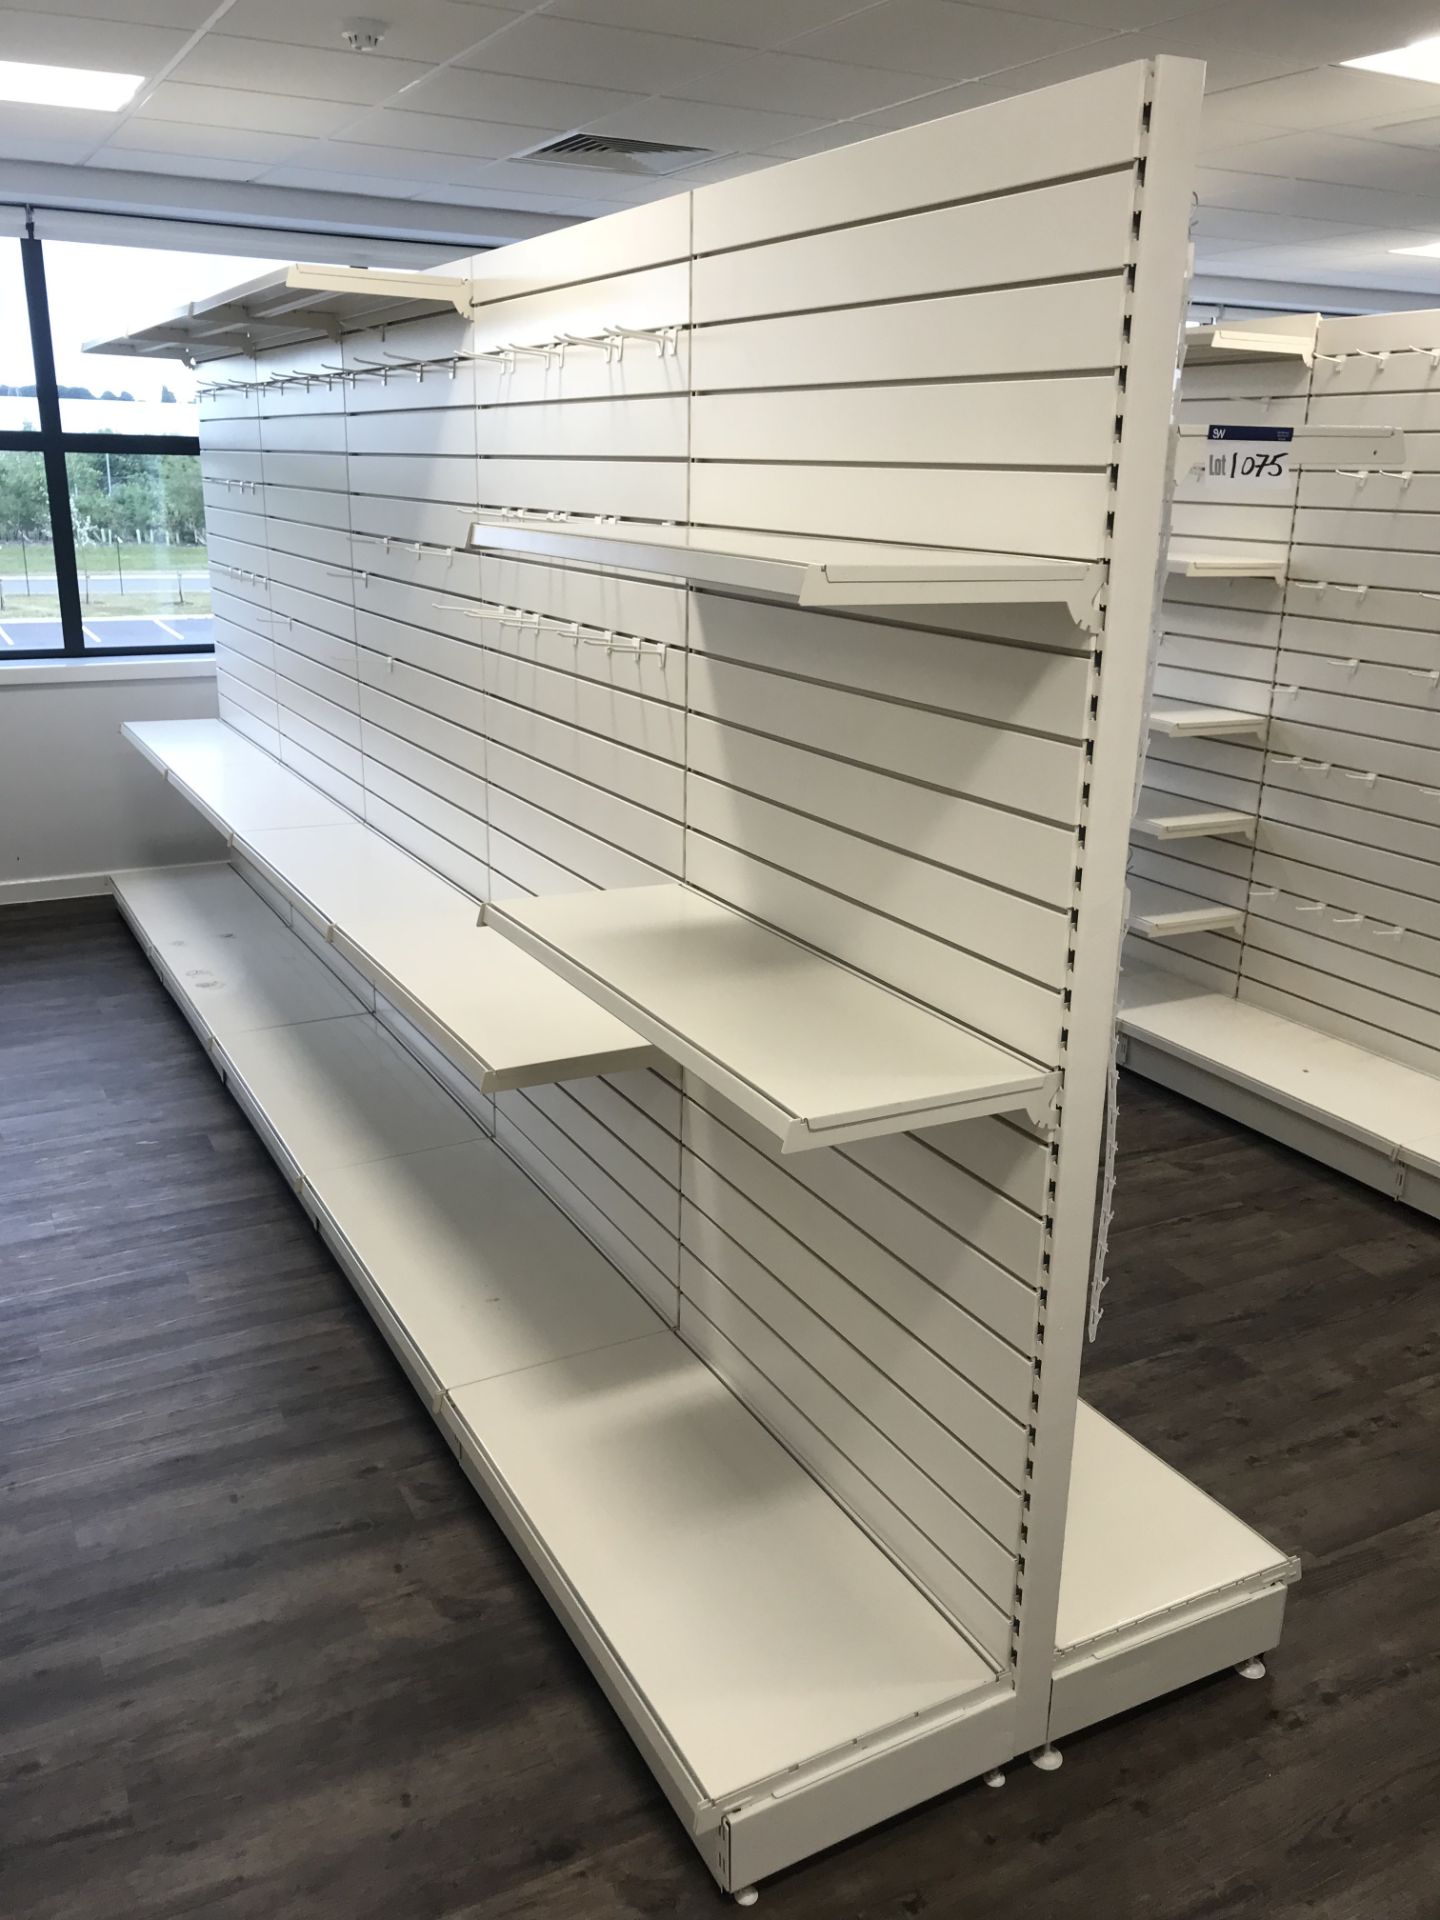 5 x Bays of Cantilever Shelving